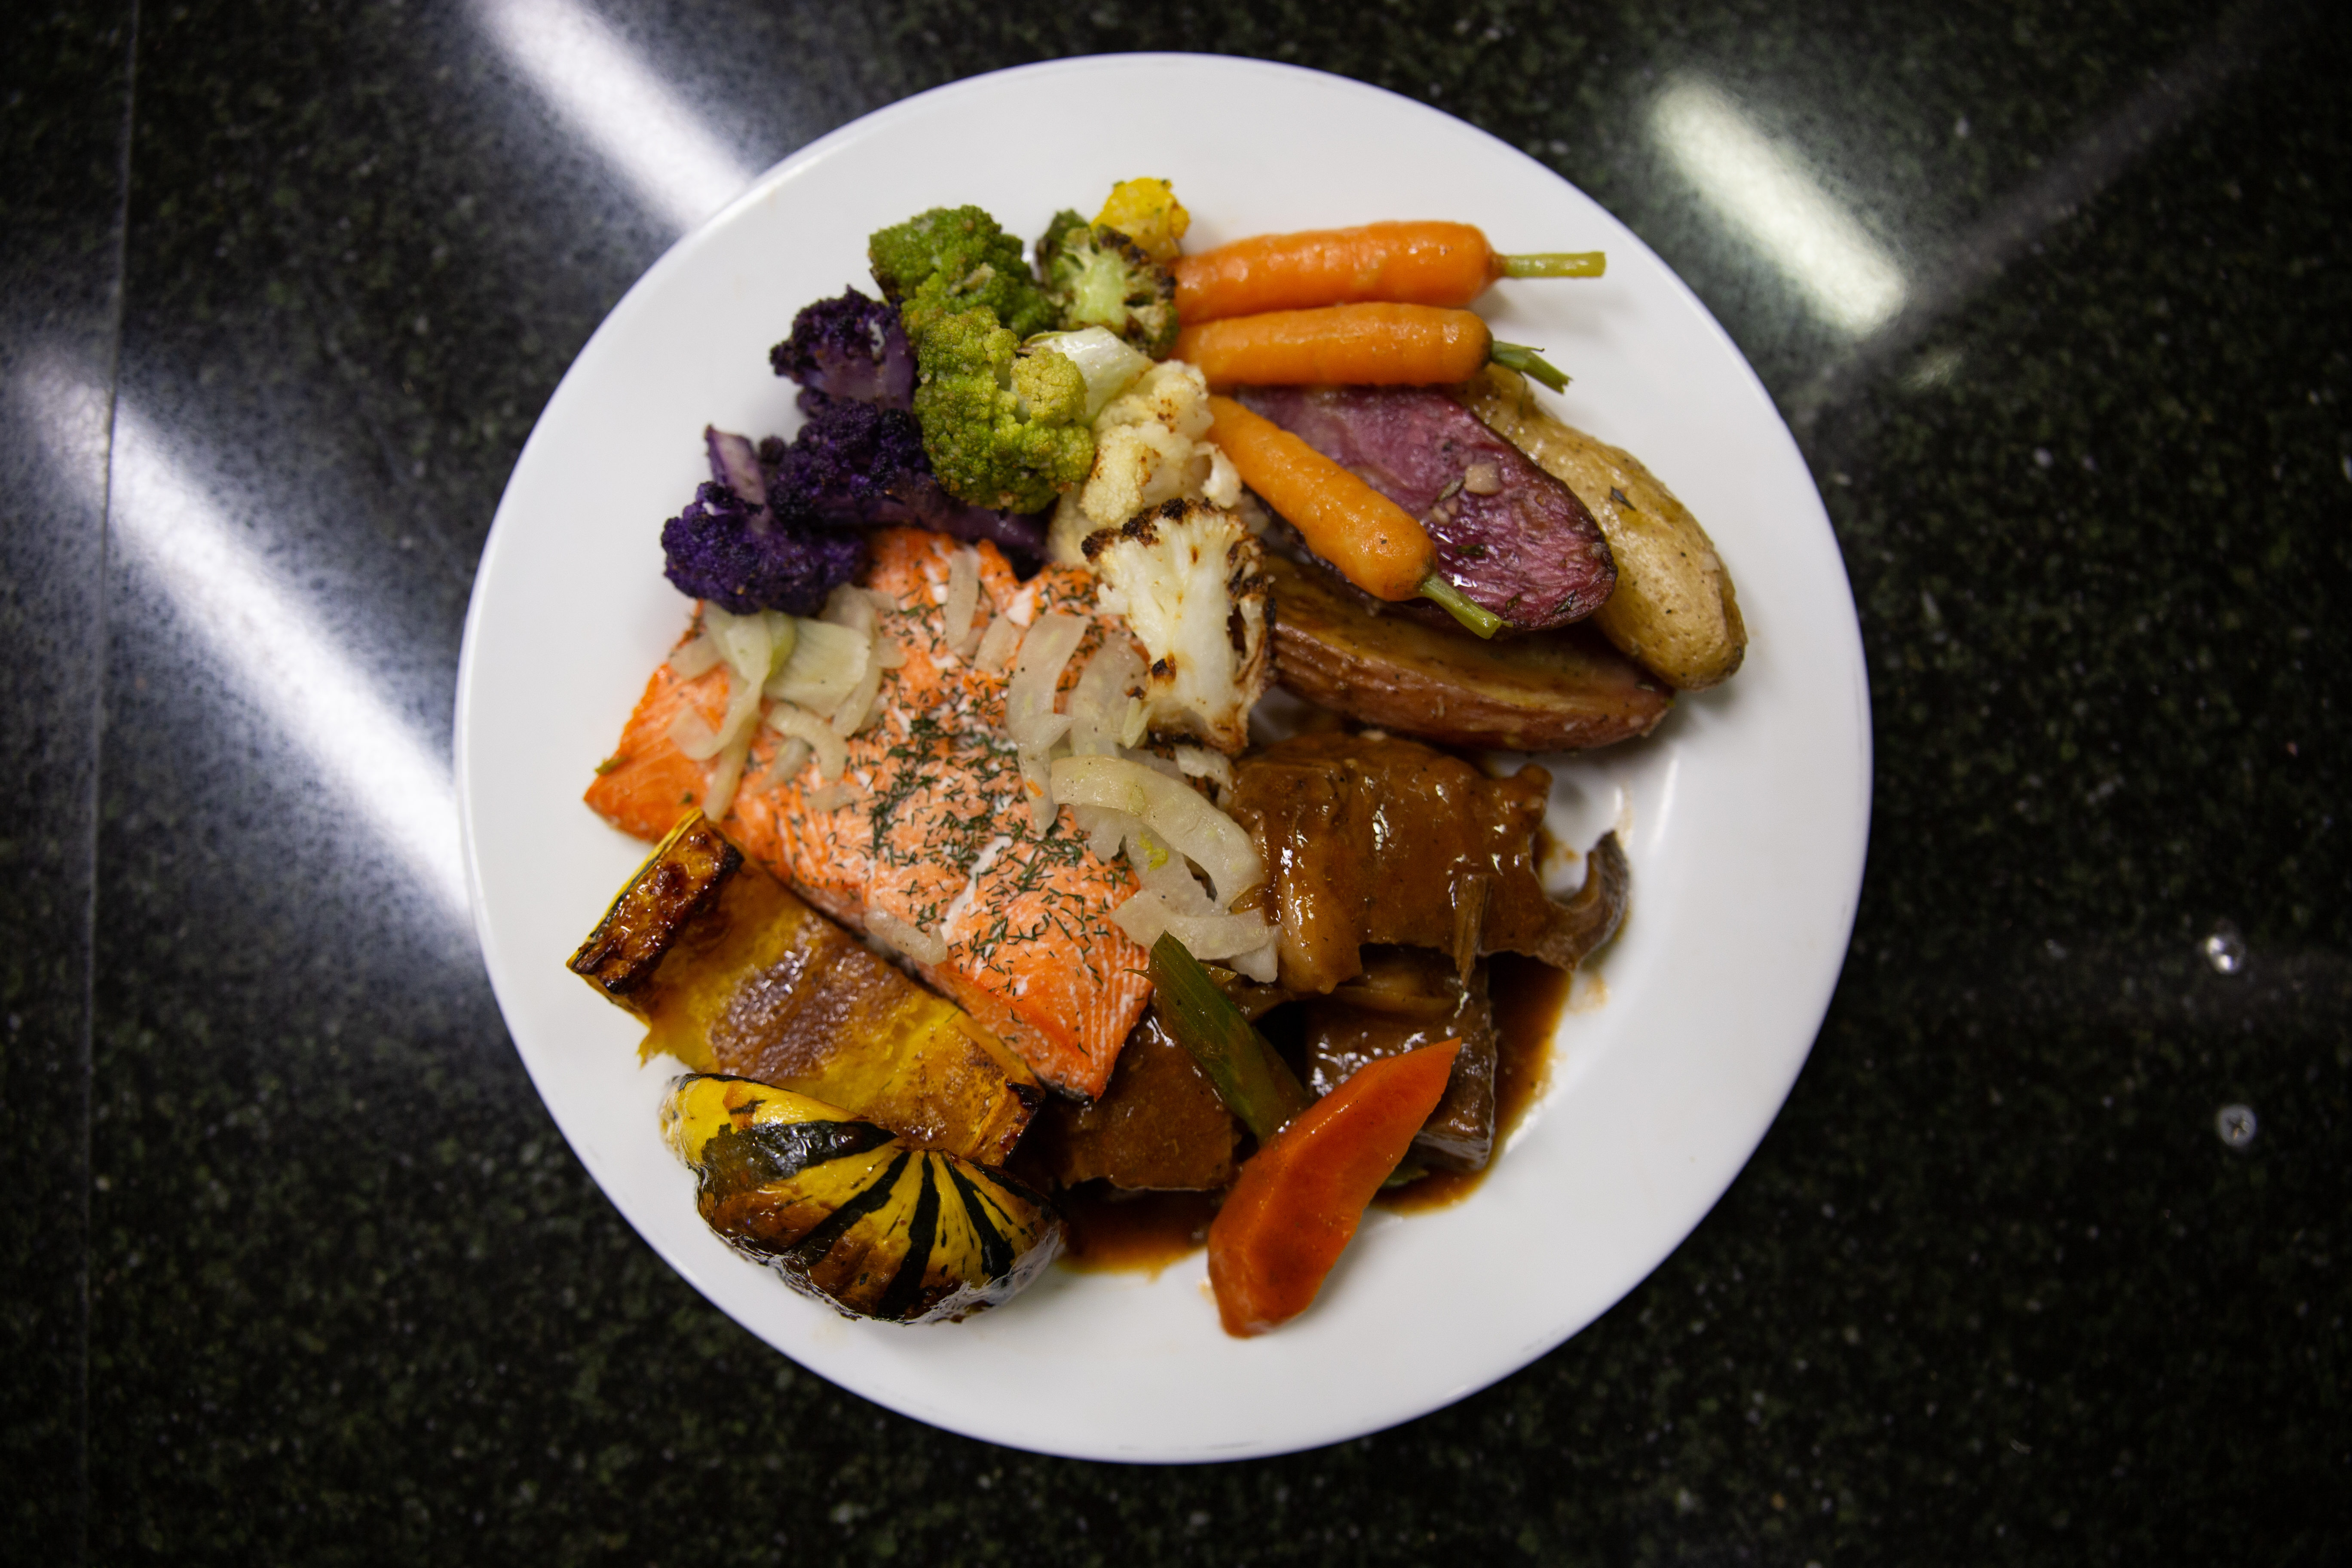 An overhead shot of a round white place on a large black countertop surface. On the plate is a very colorful assortment of fall vegetables: whole orange carrots, green broccoli, purple cauliflower, roasted purple fingerling potato, a roasted acorn squash cut in half to reveal orange flesh. The veggies are surrounding a pinkish fillet of salmon topped with a white sauce and green herbs.